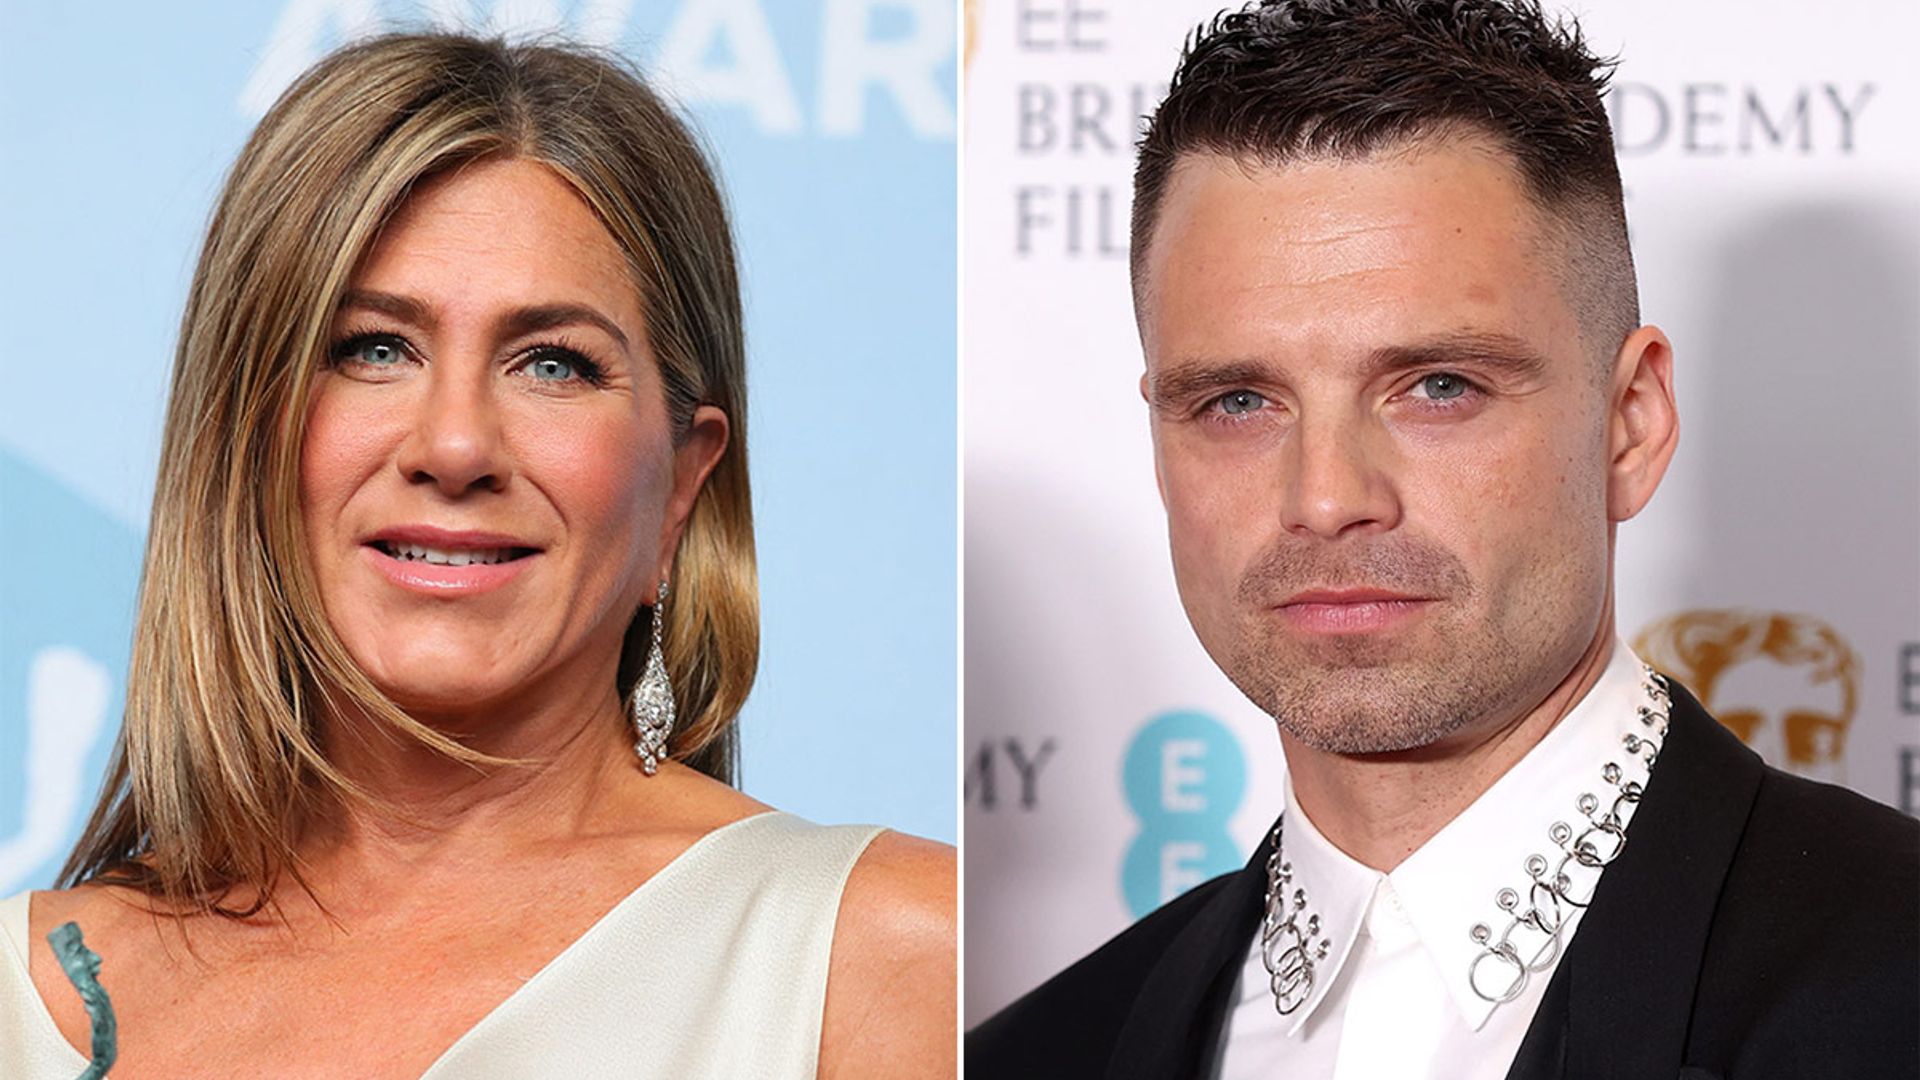 Jennifer Aniston and Sebastian Stan drive fans wild as they cover Variety